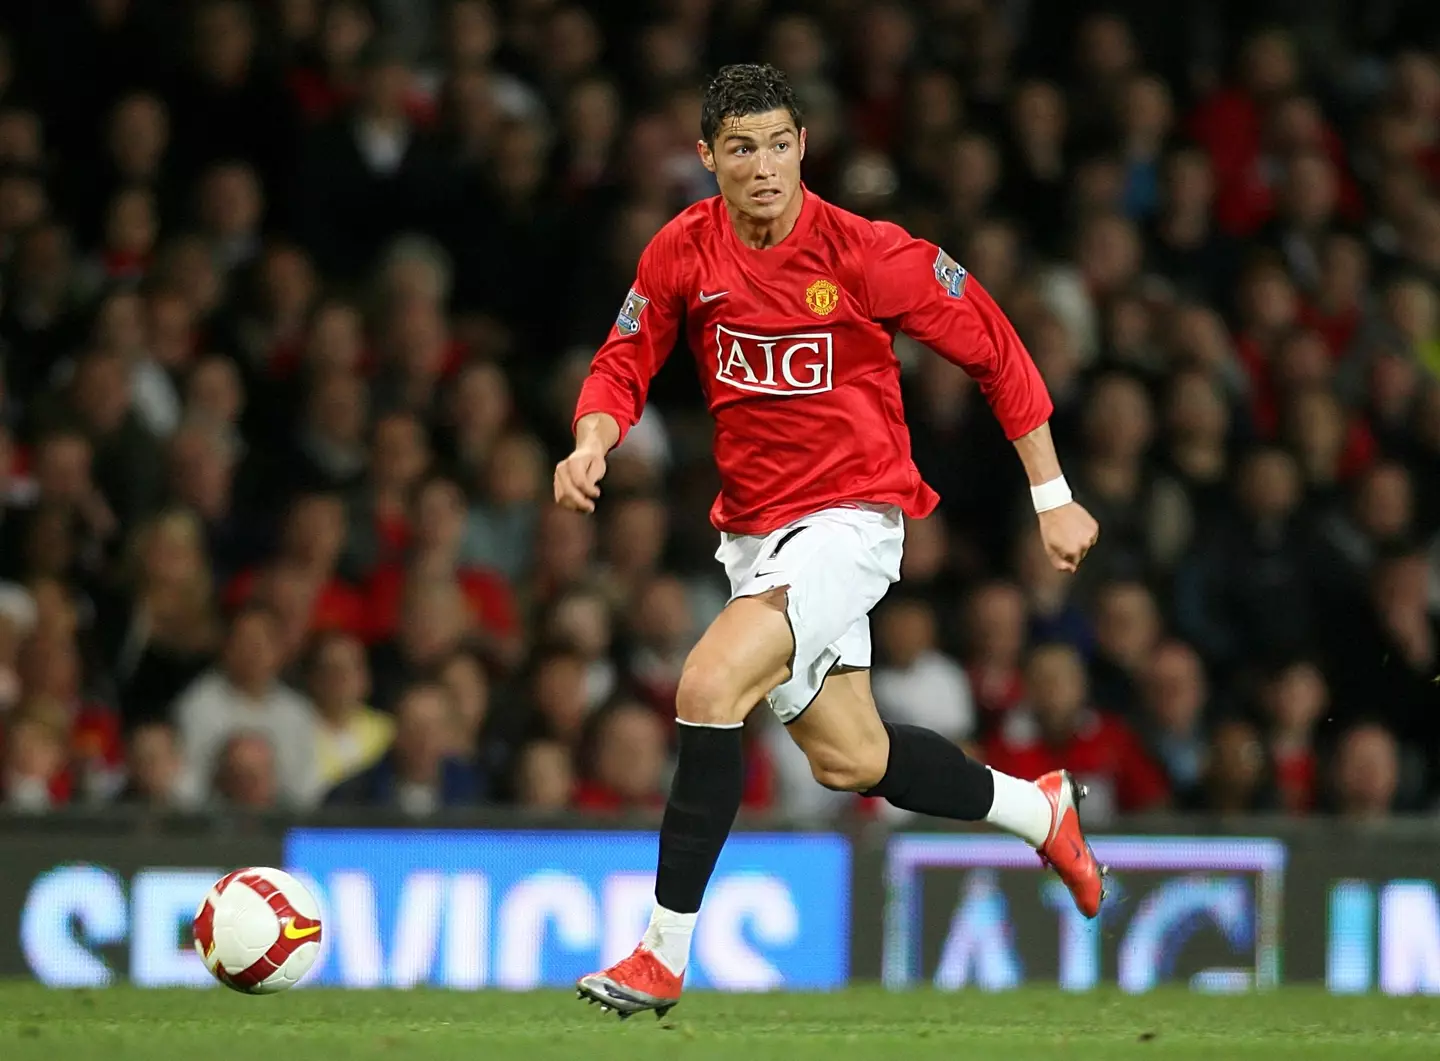 Ronaldo is a Red Devil once again at City's loss